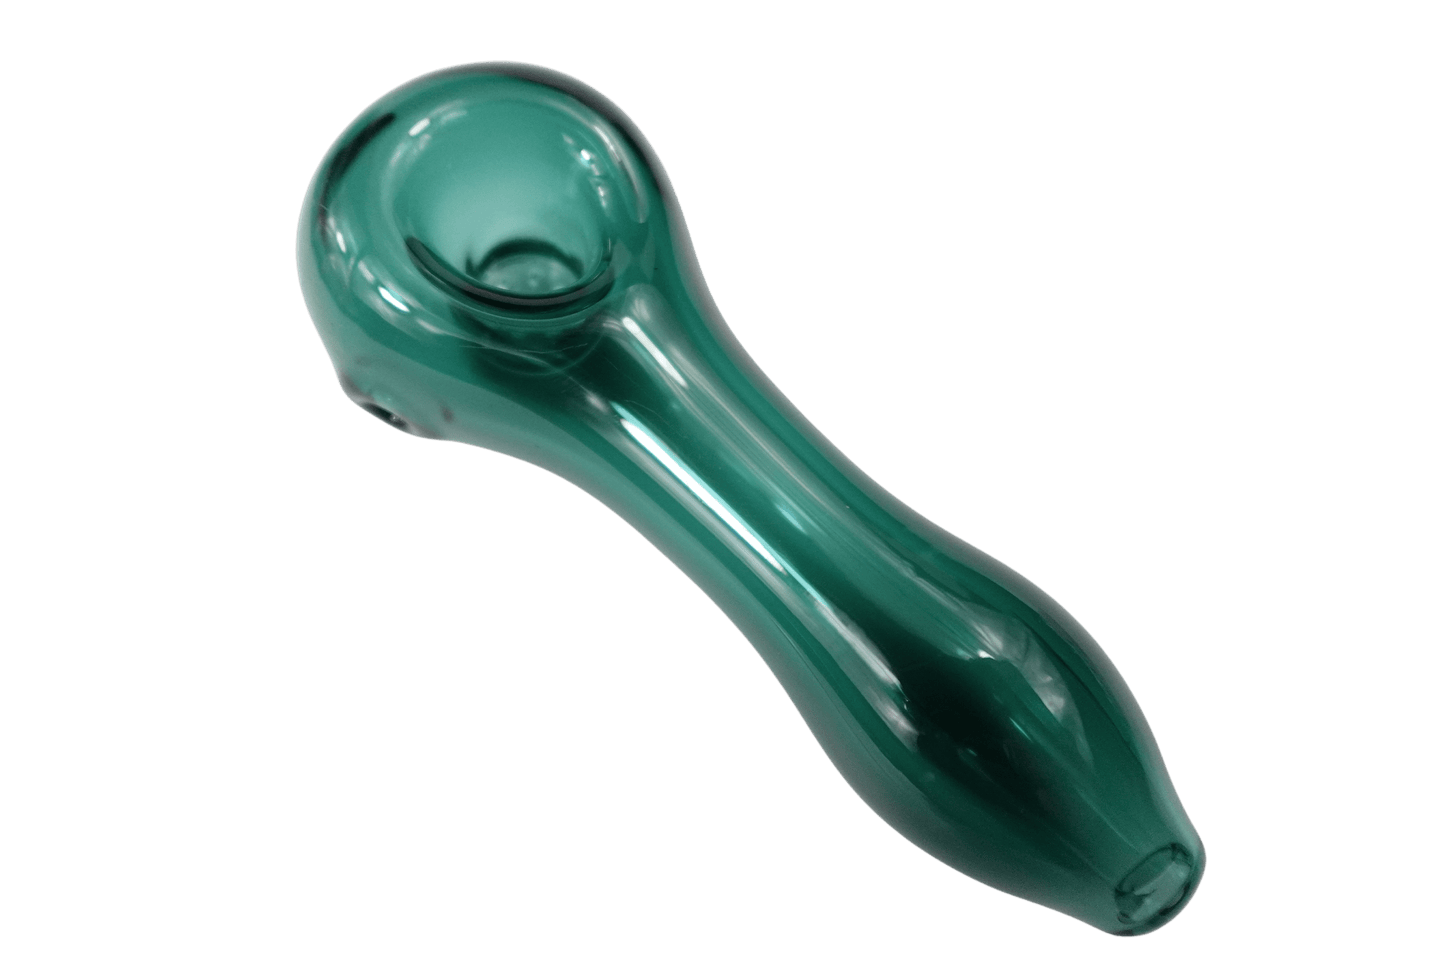 Cloud 8 Smoke Accessory glass hand pipe Green 4'' Simple Classic Heavy Duty Glass Spoon Hand Pipe